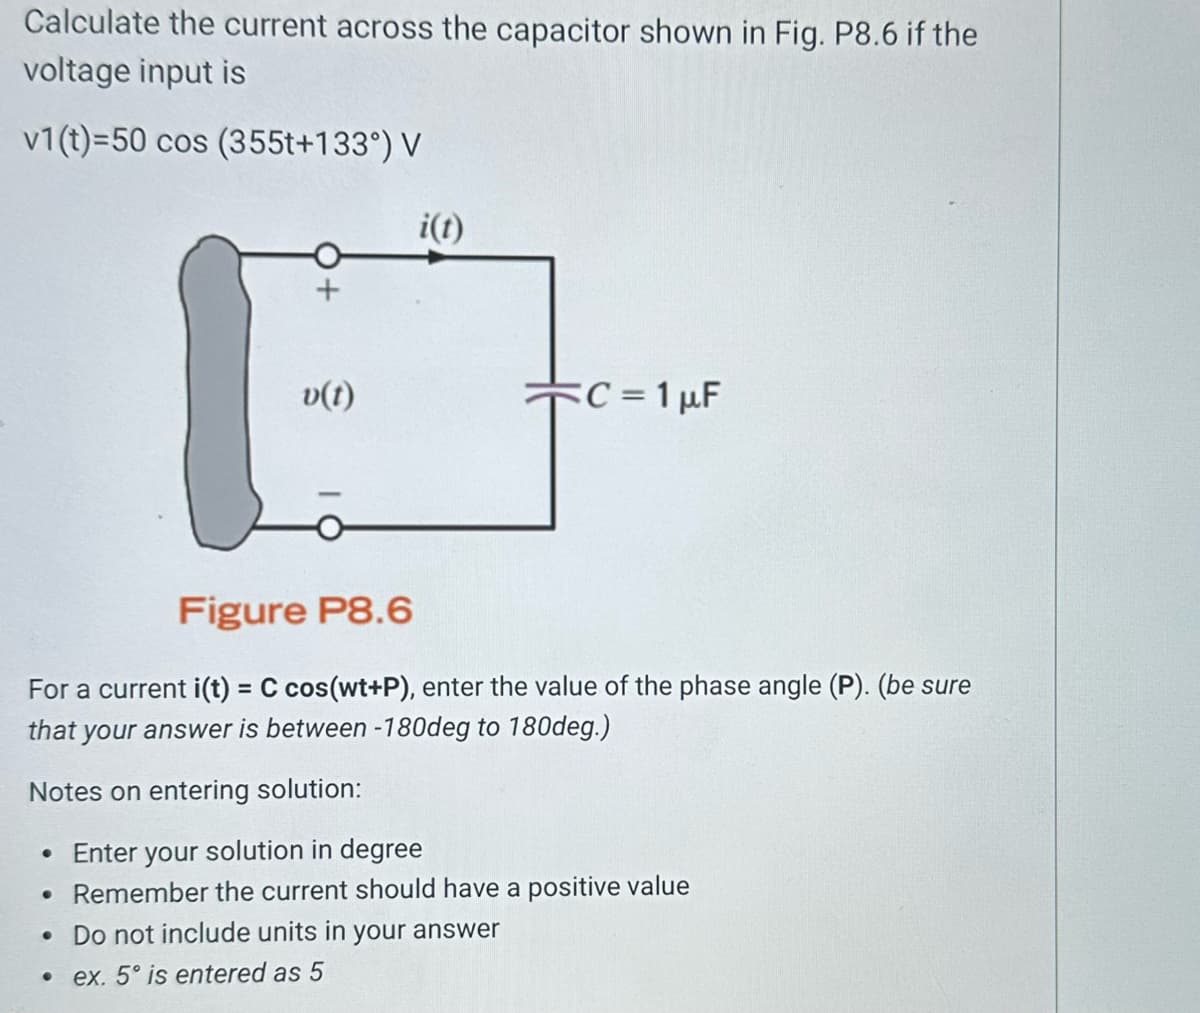 Calculate the current across the capacitor shown in Fig. P8.6 if the
voltage input is
v1(t)=50 cos (355t+133°) V
1
v(t)
i(t)
C = 1 µF
Figure P8.6
For a current i(t) = C cos(wt+P), enter the value of the phase angle (P). (be sure
that your answer is between -180deg to 180deg.)
Notes on entering solution:
• Enter your solution in degree
• Remember the current should have a positive value
• Do not include units in your answer
.ex. 5° is entered as 5